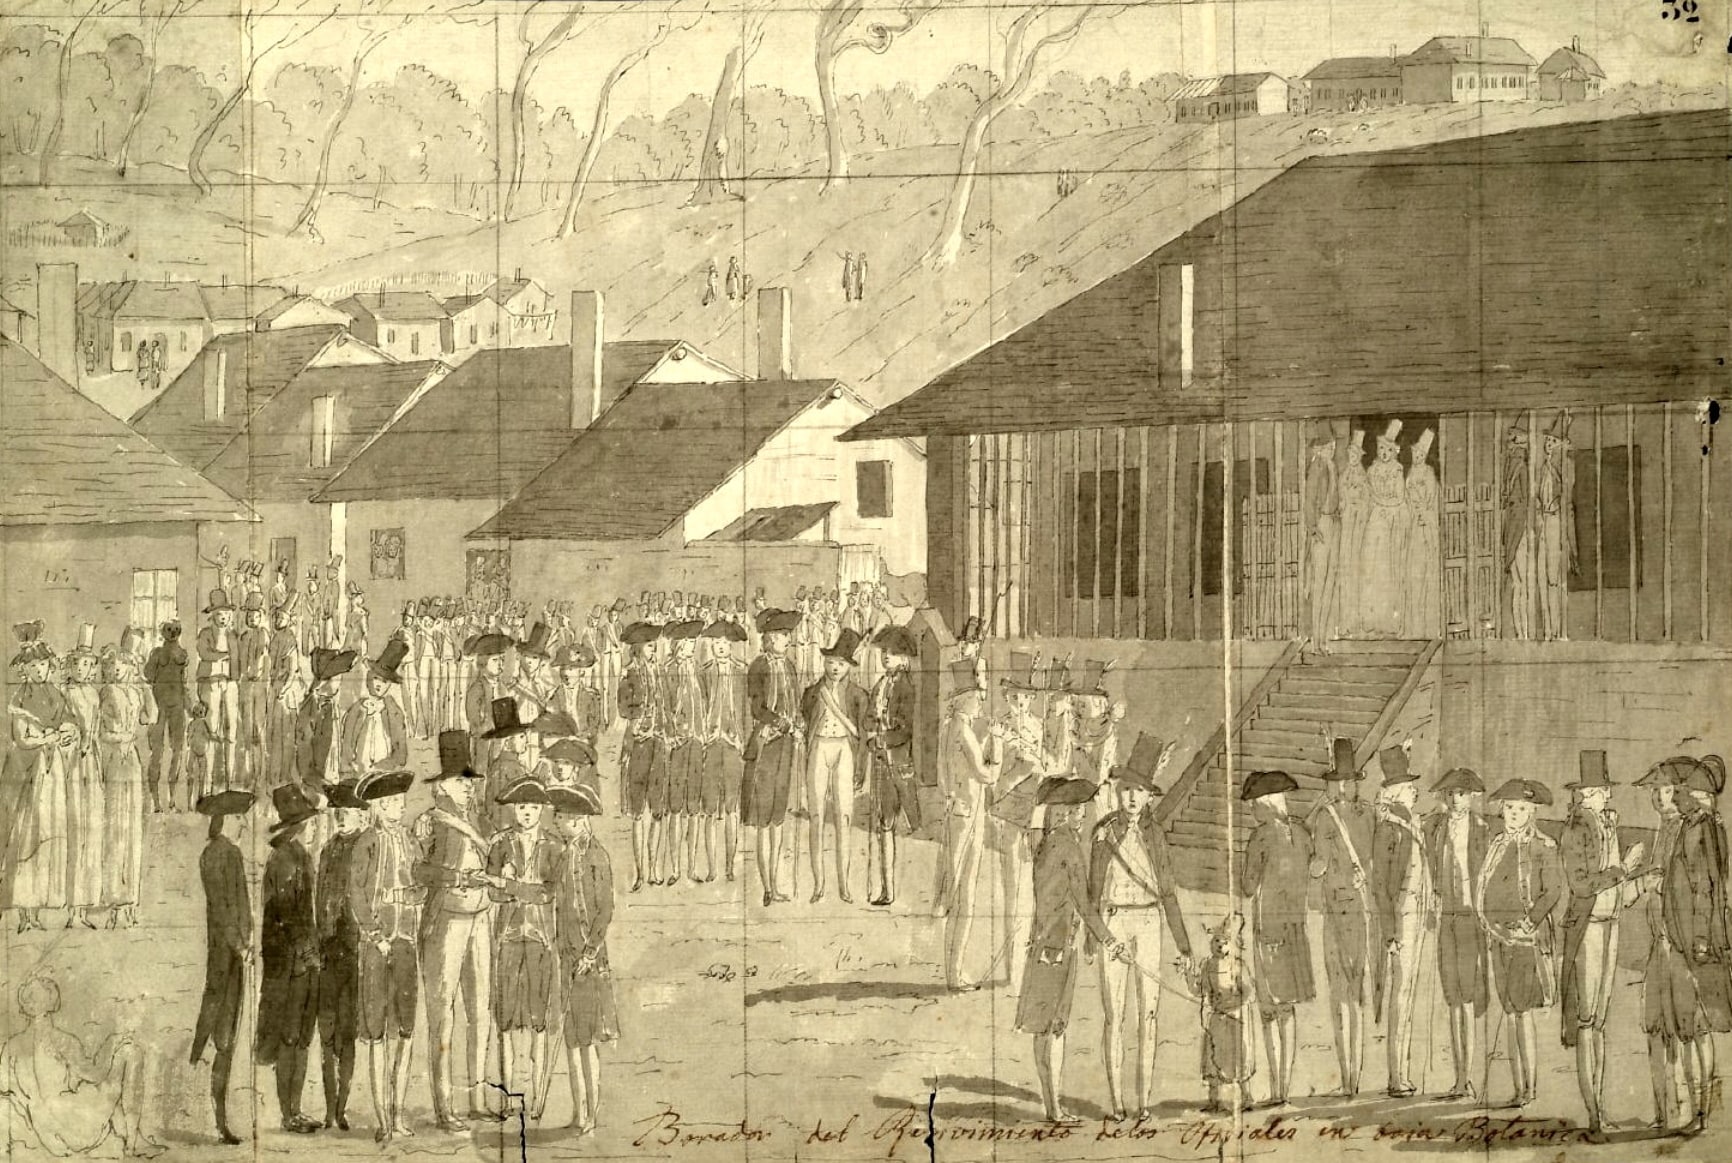 Reception of the [Spanish] officers in Botany Bay [sic], Sydney, March 1793